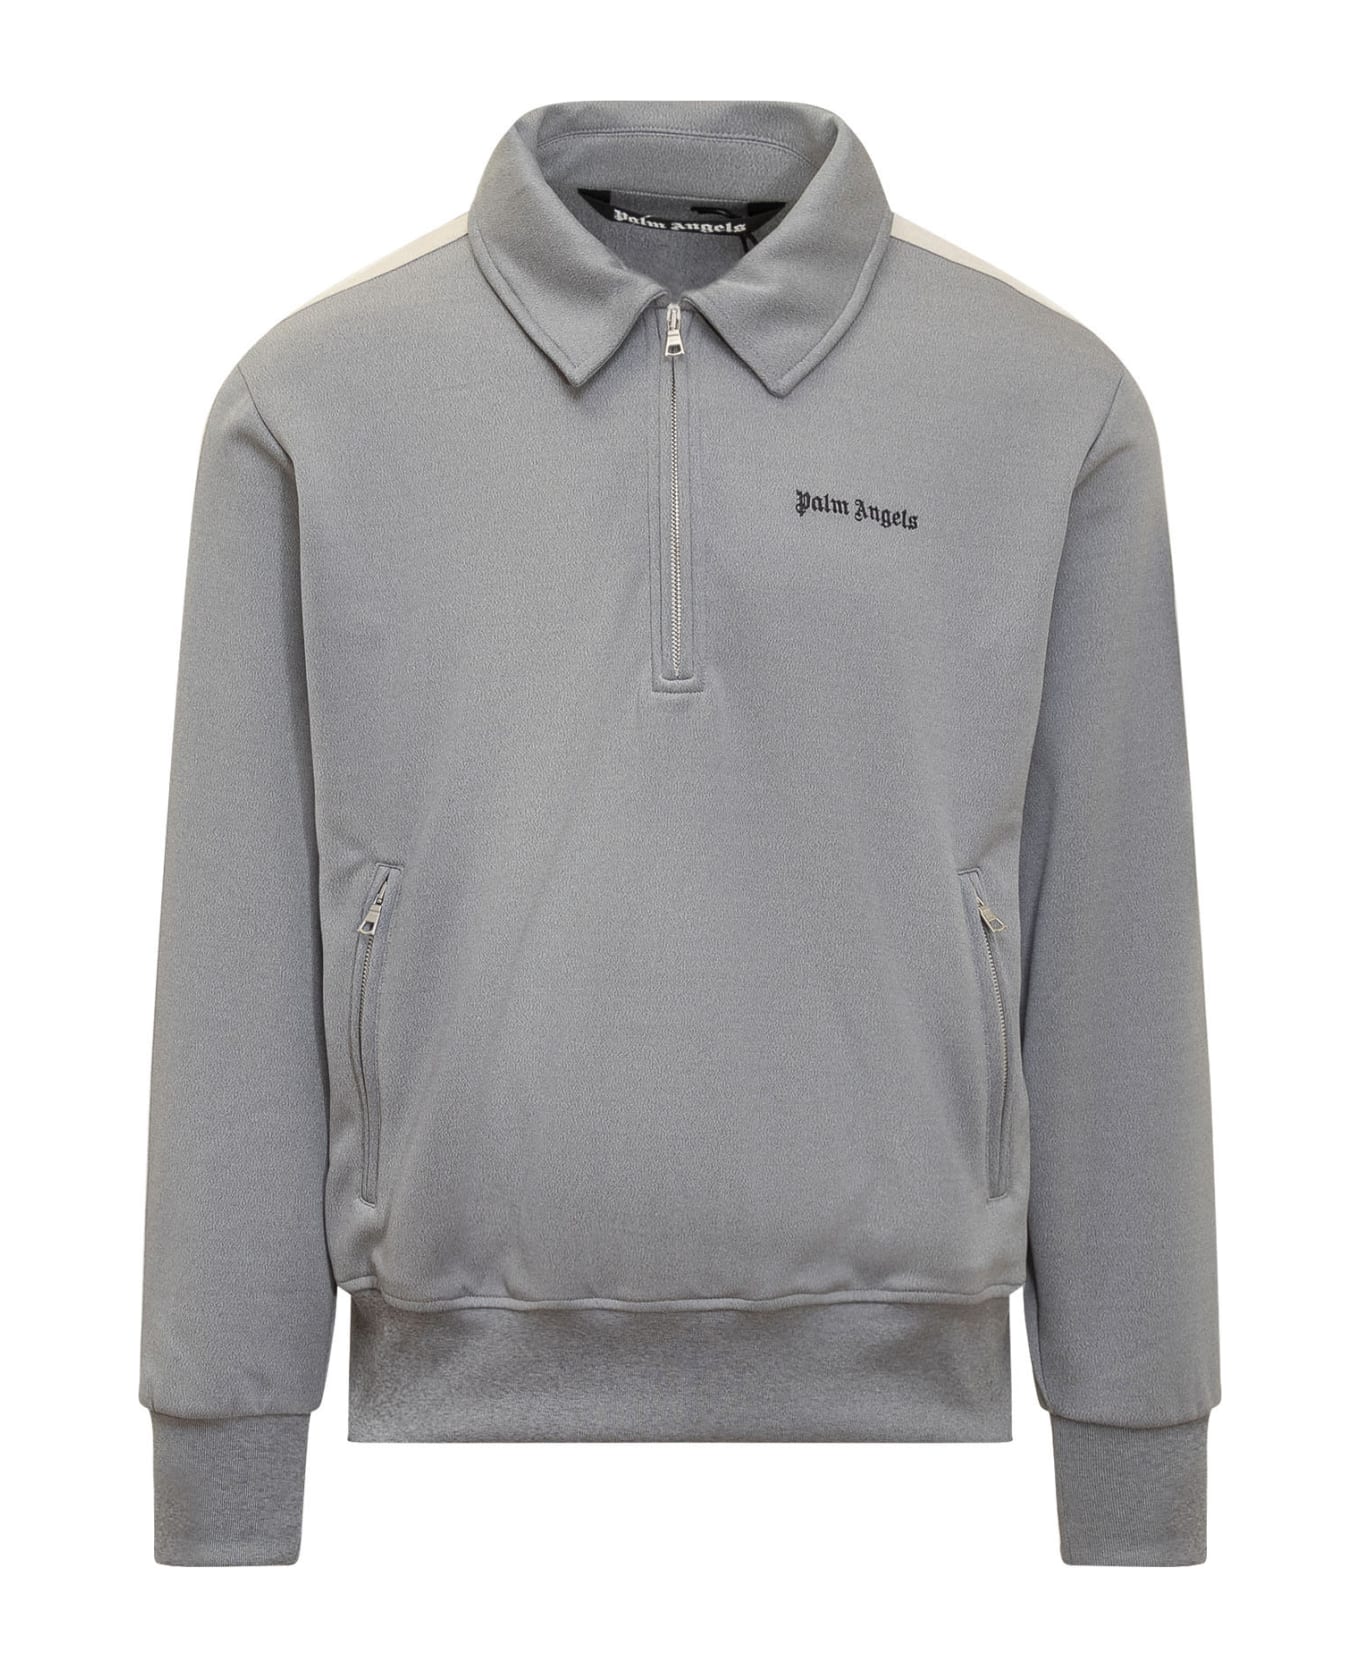 Palm Angels Sweatshirt With Bands Along The Sleeves - MELANGE GREY